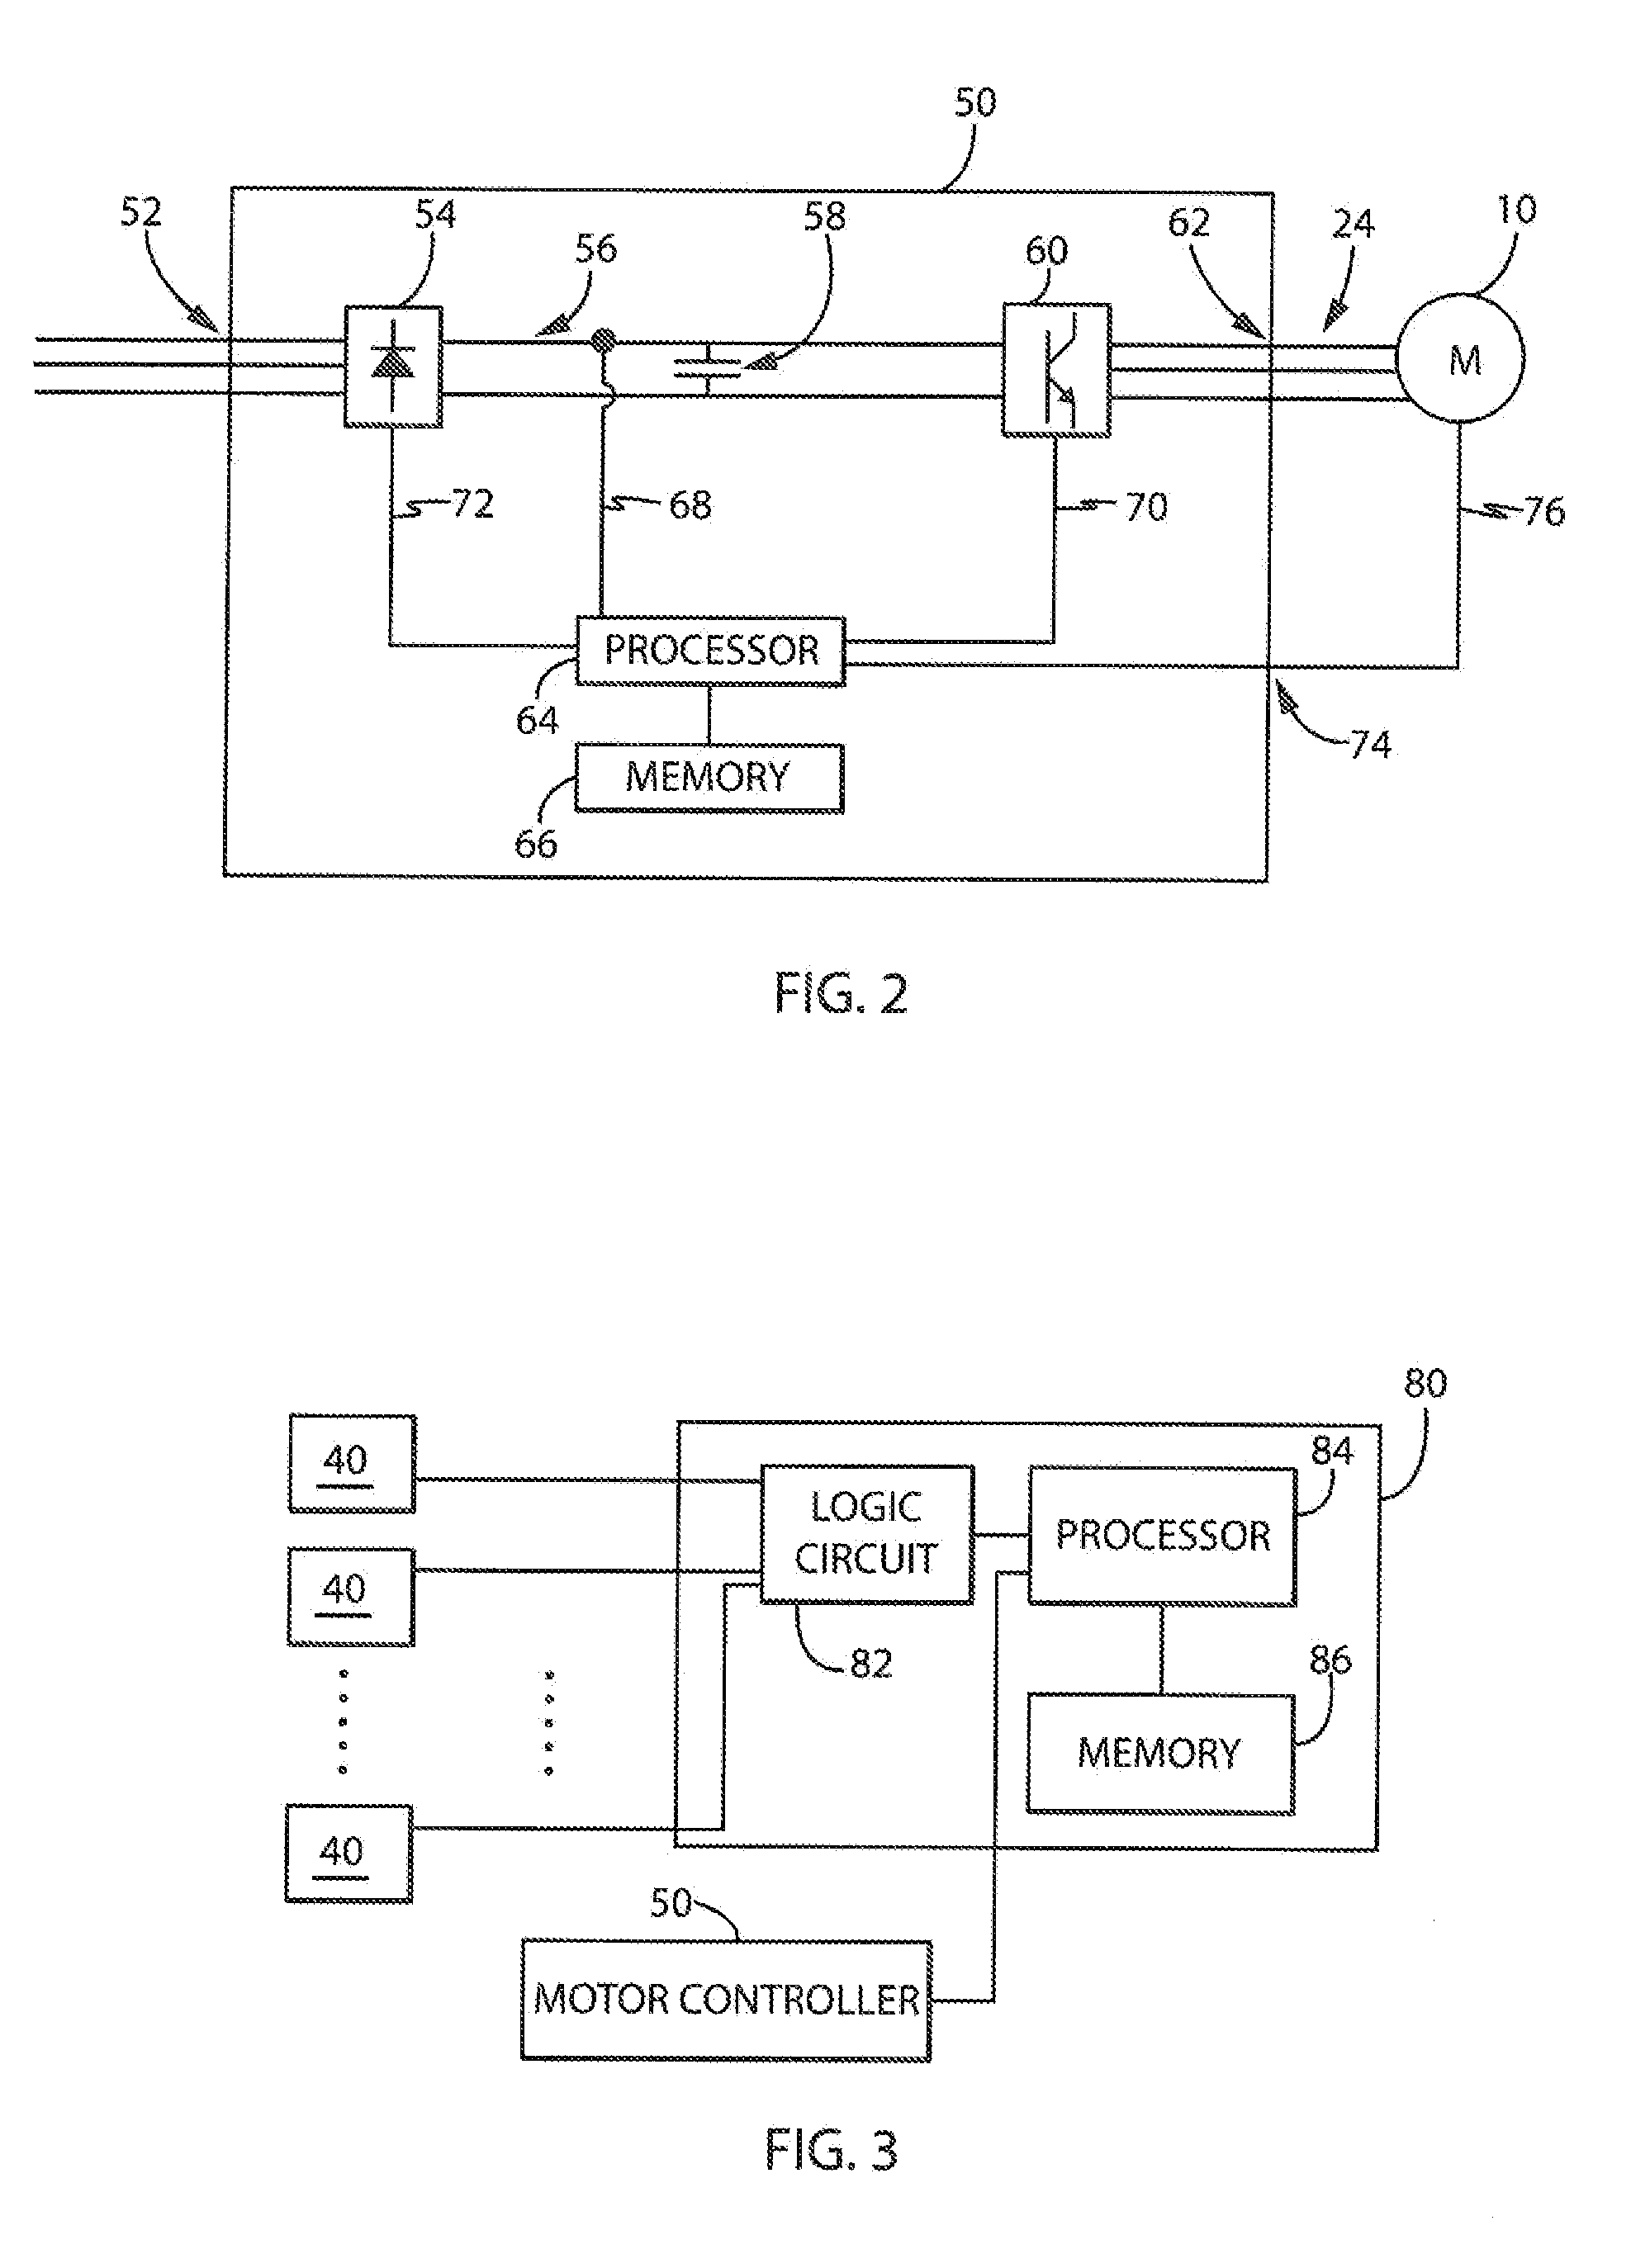 System and Method for Detection of Motor Vibration